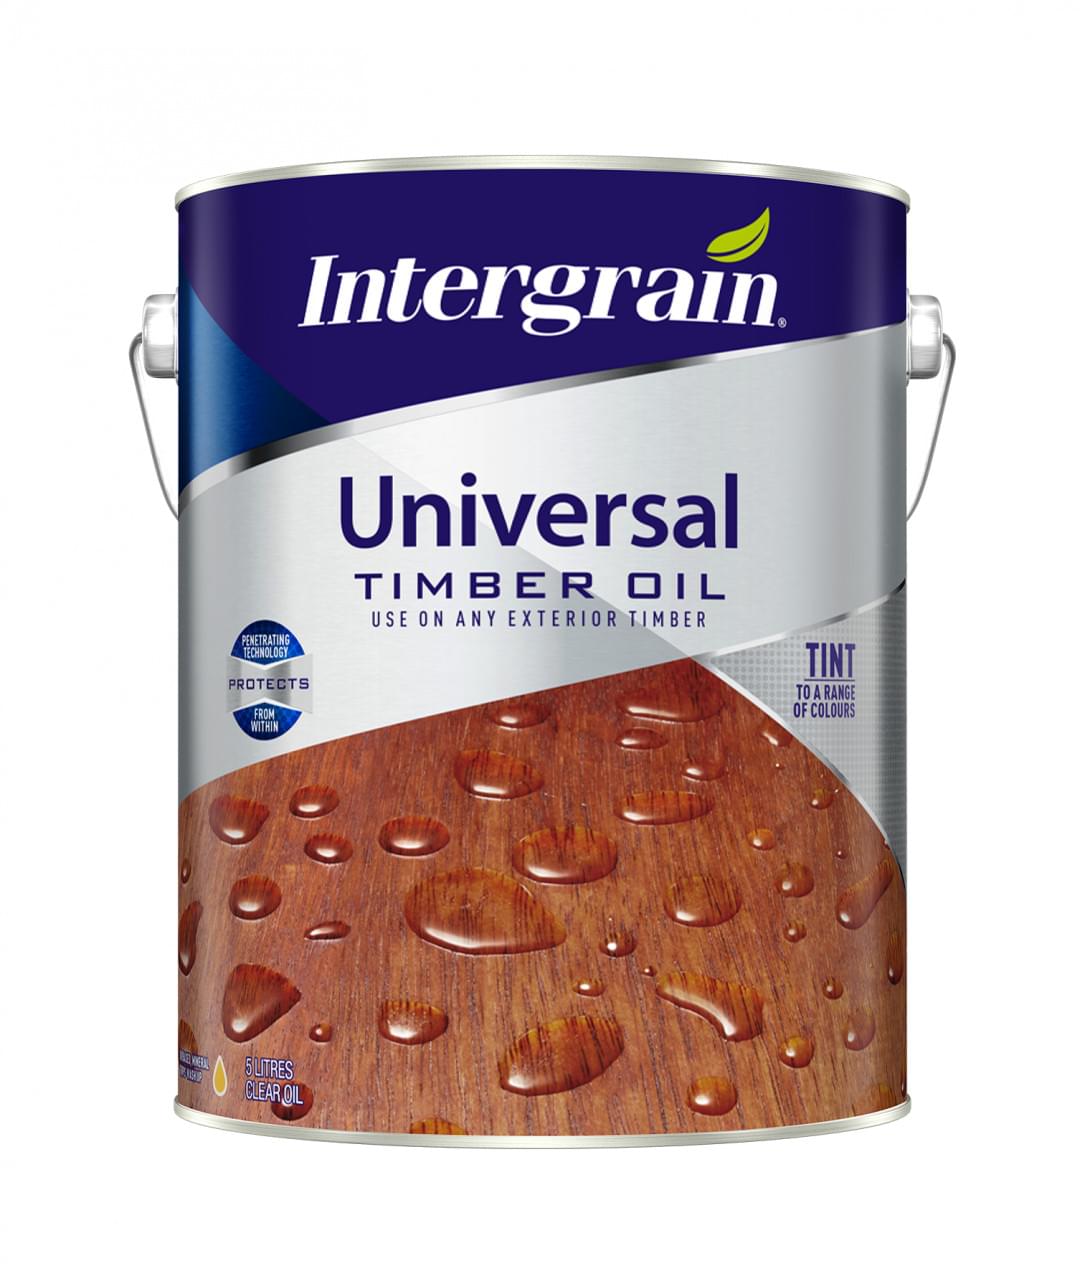 Intergrain Universal Timber Oil from Dulux